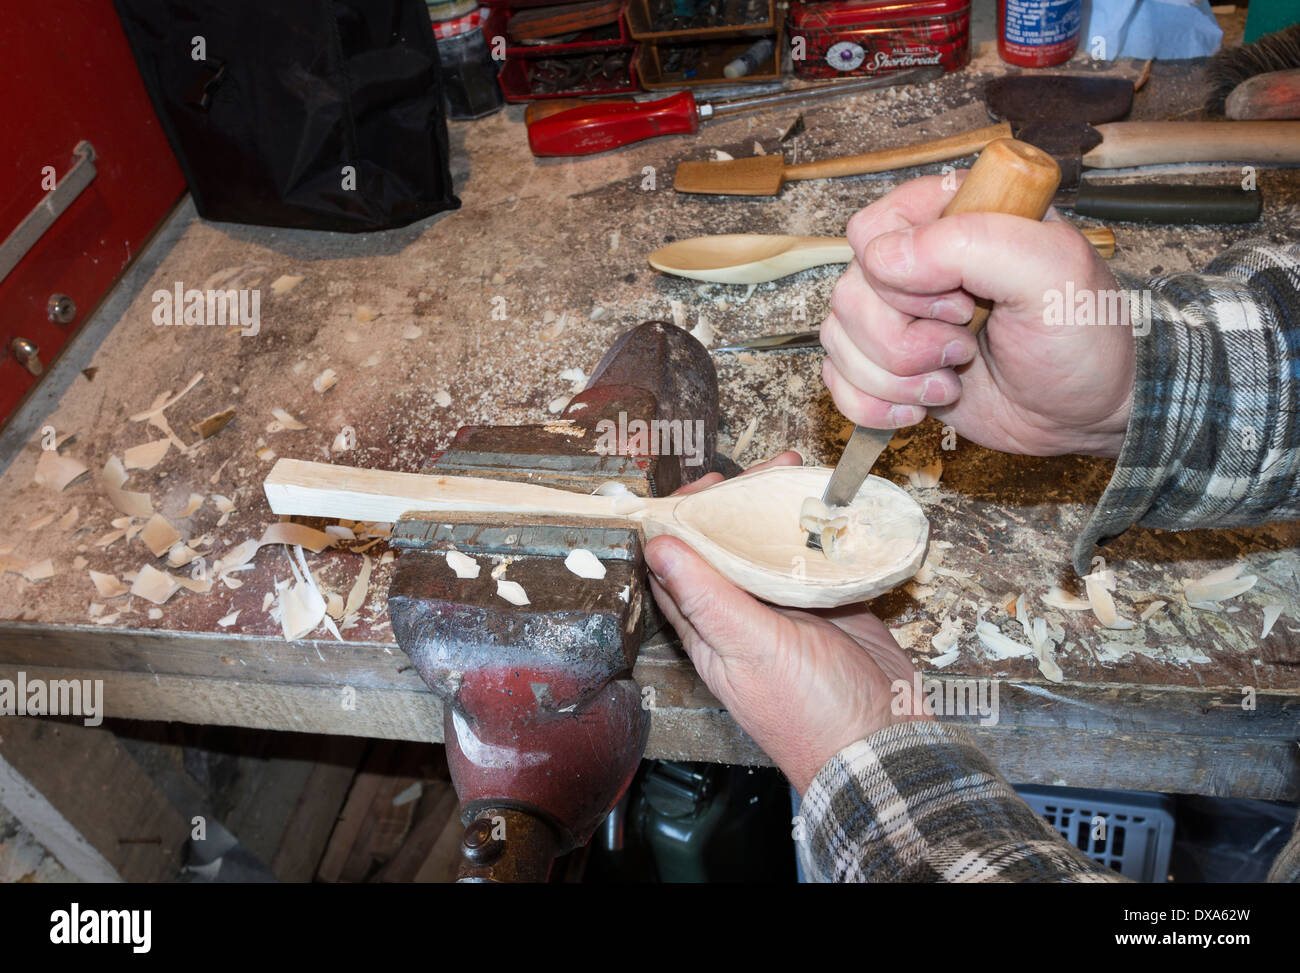 Spoon Carver Using a Crook Knife to Carve out the Bowl Stock Photo